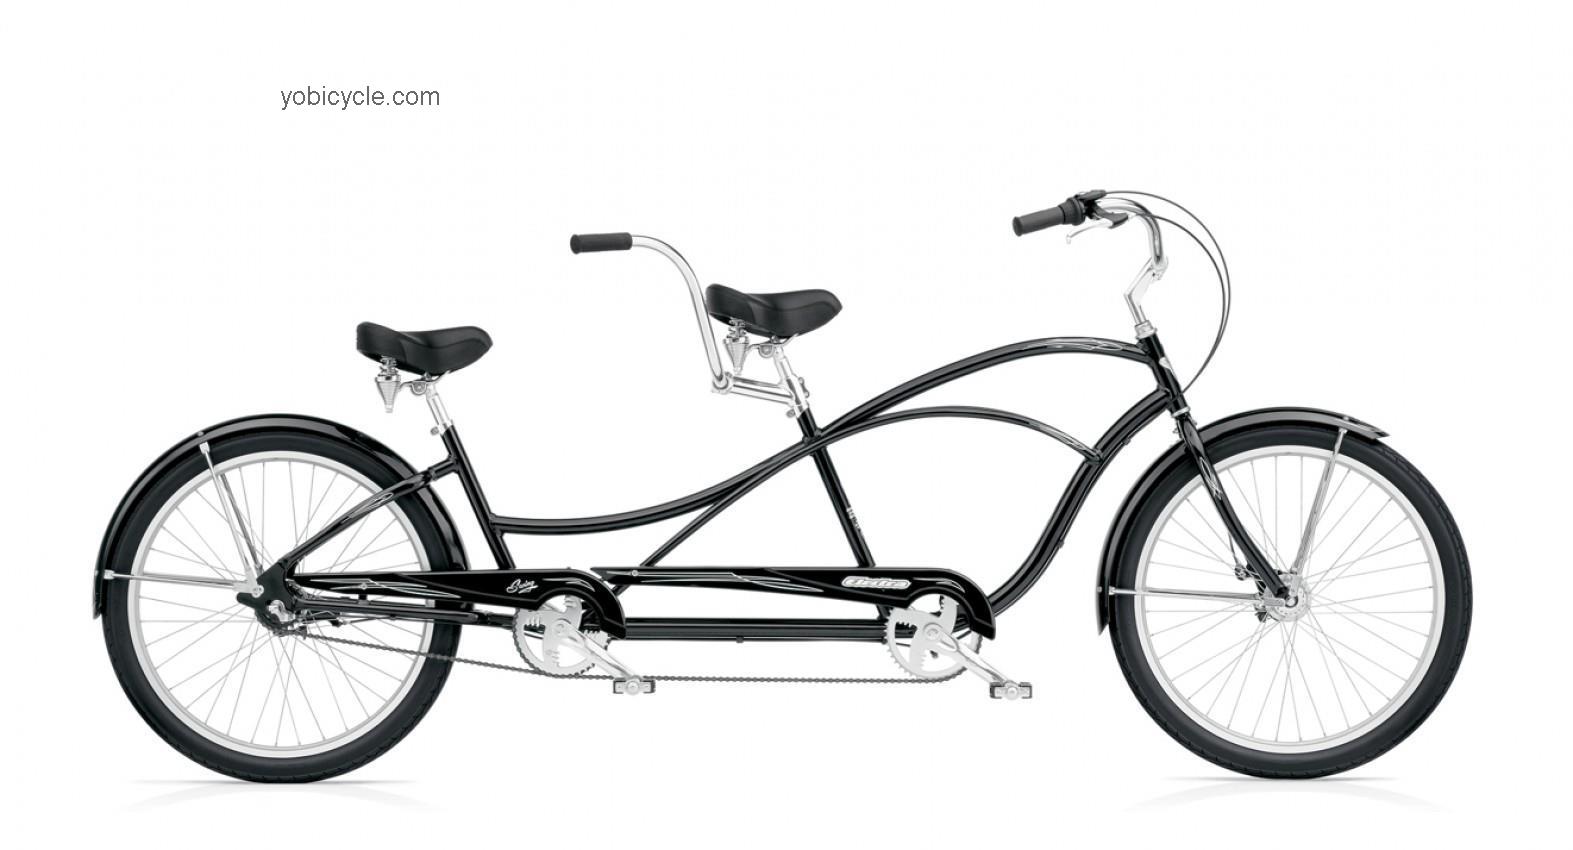 Electra Swing Tandem 3i 2011 comparison online with competitors